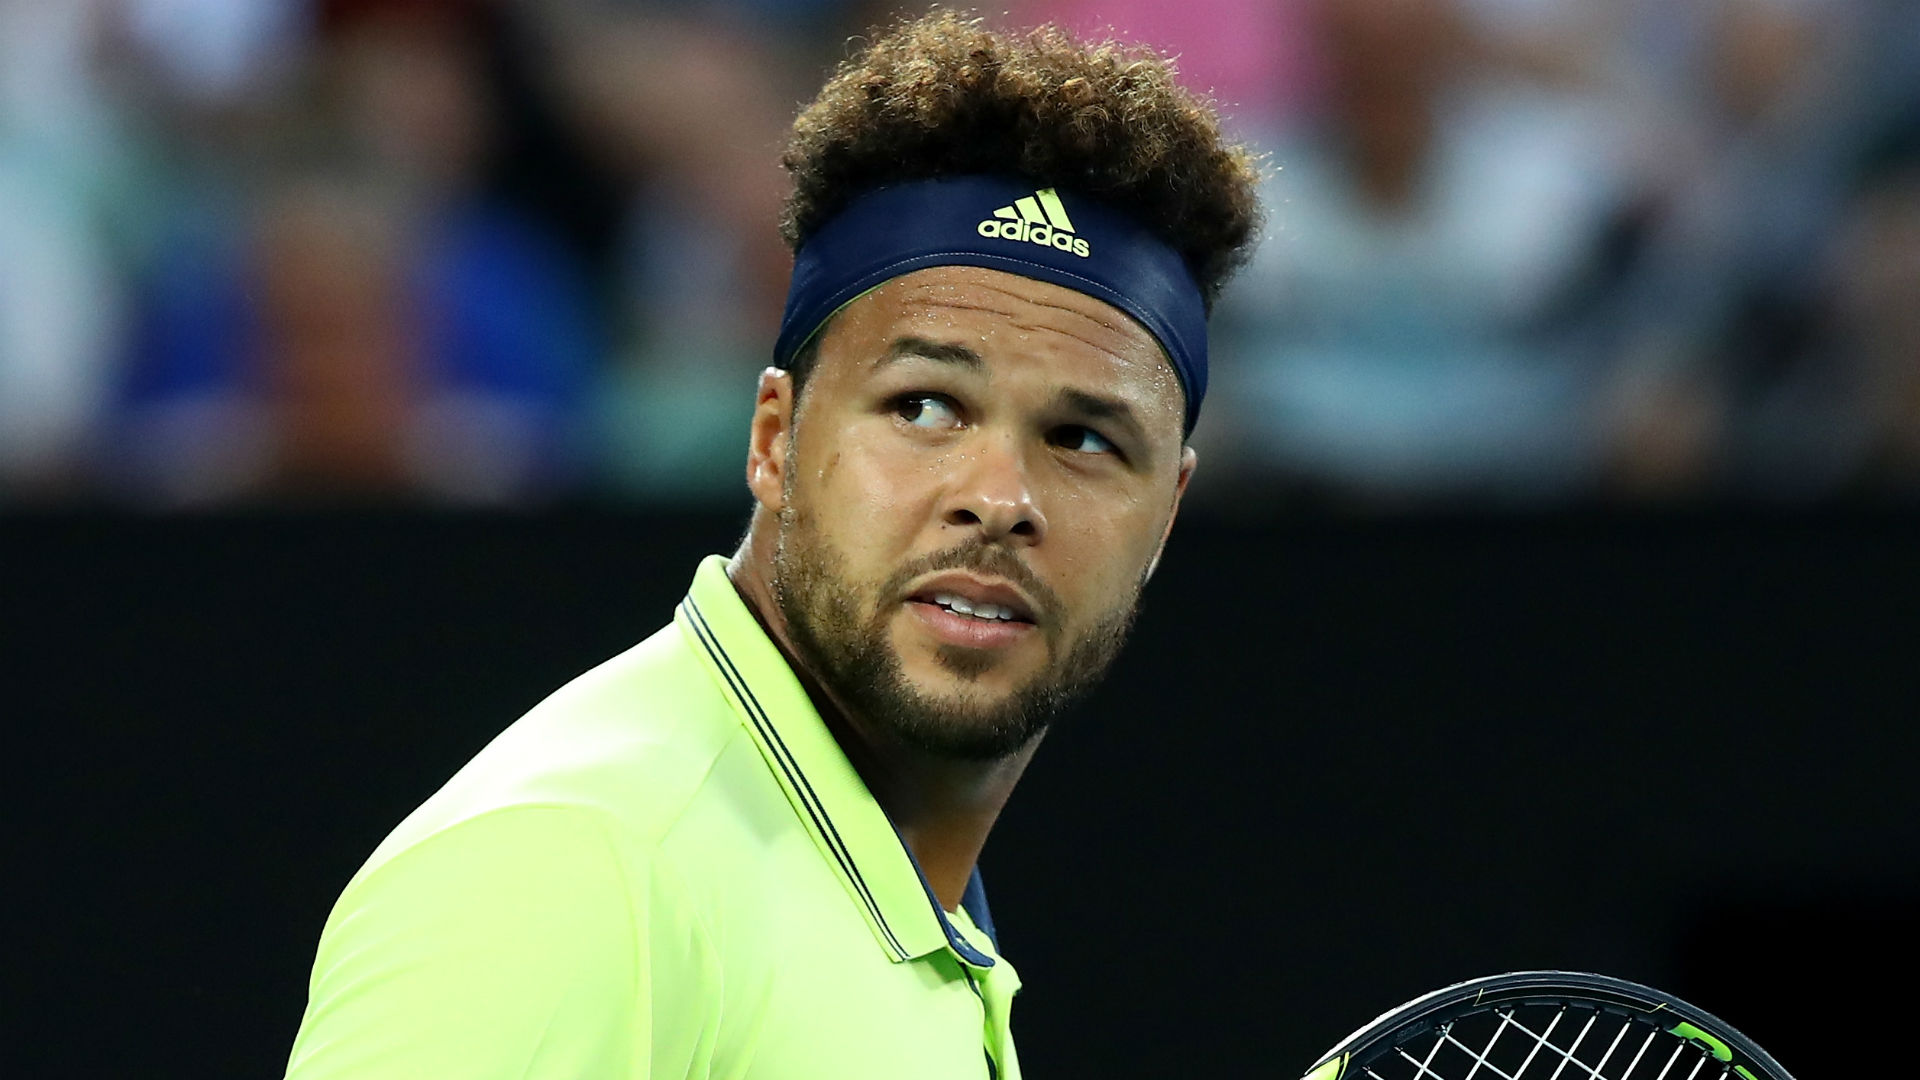 Defending champion Jo-Wilfried Tsonga ended an eight-month wait for a win in Antwerp and will now face compatriot Gael Monfils.